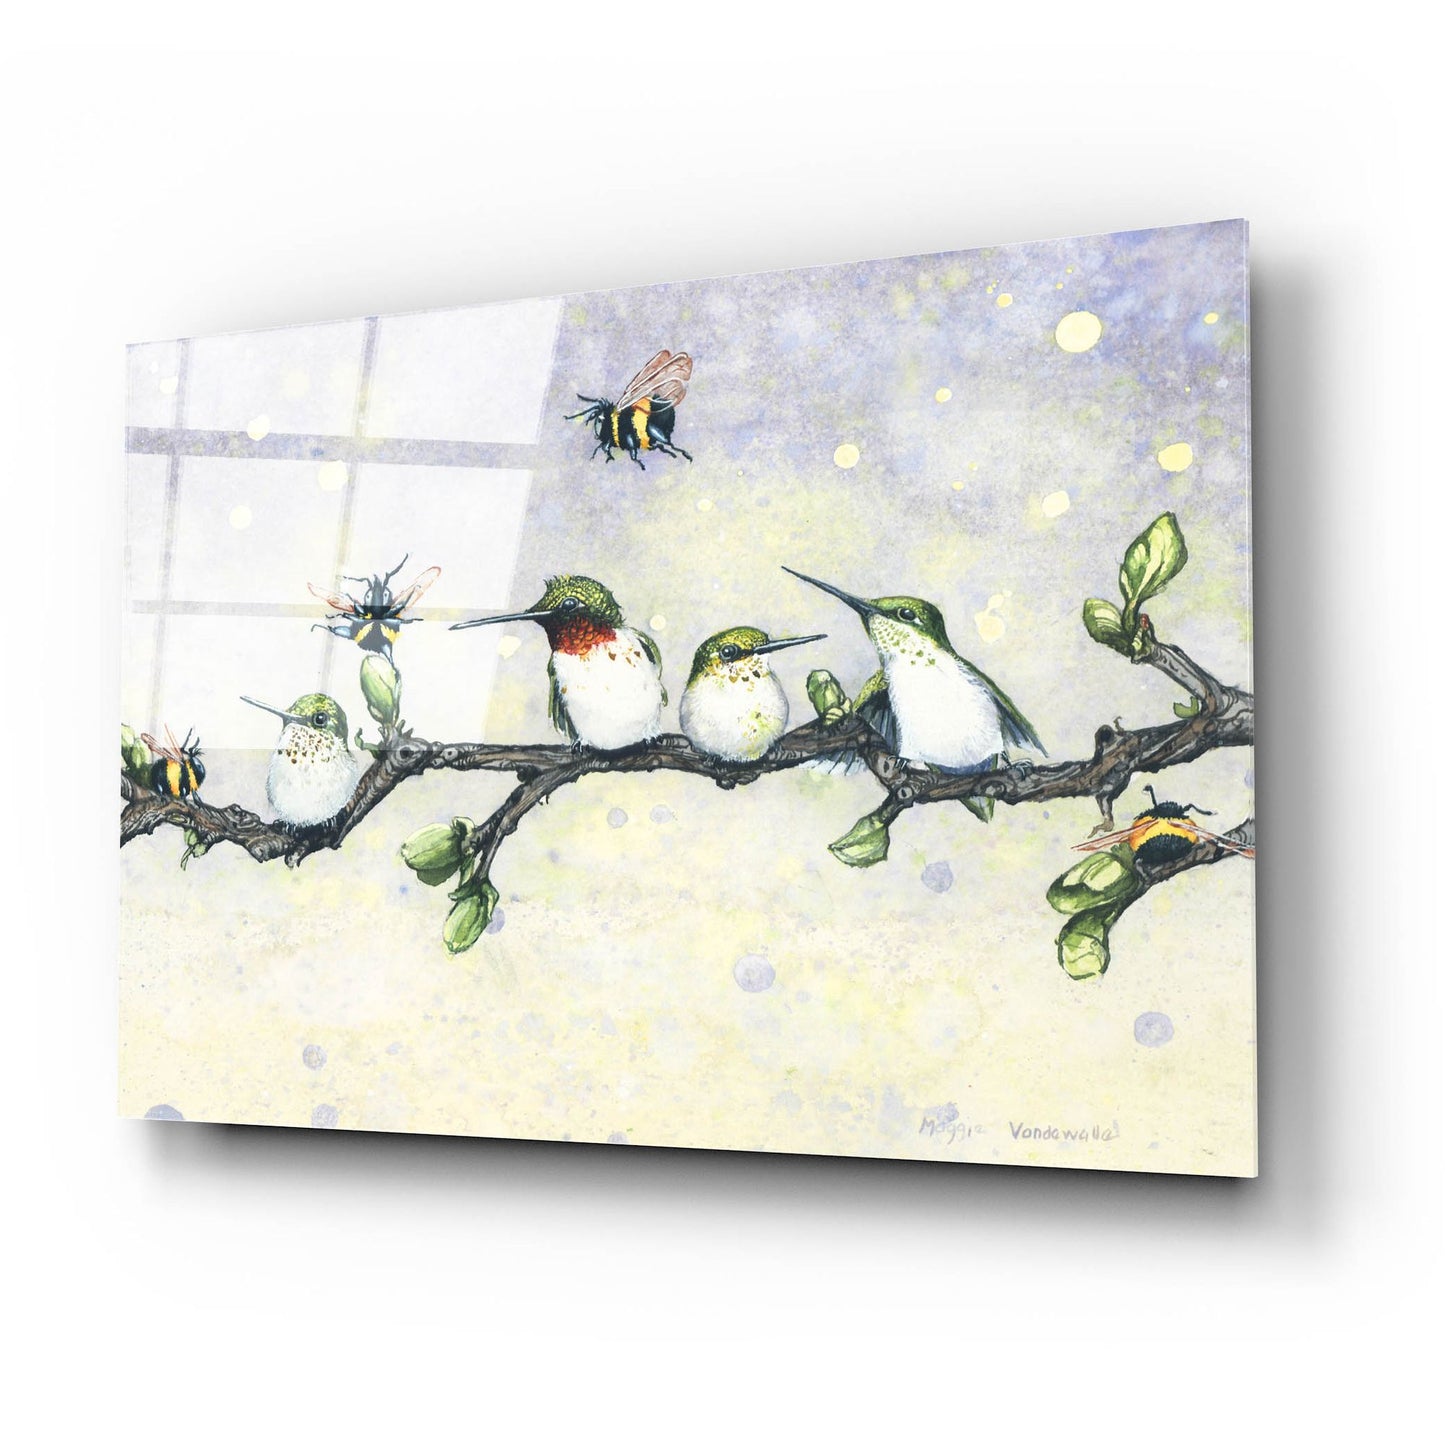 Epic Art 'The Birds and the Bees' by Maggie Vandewalle, Acrylic Glass Wall Art,24x16